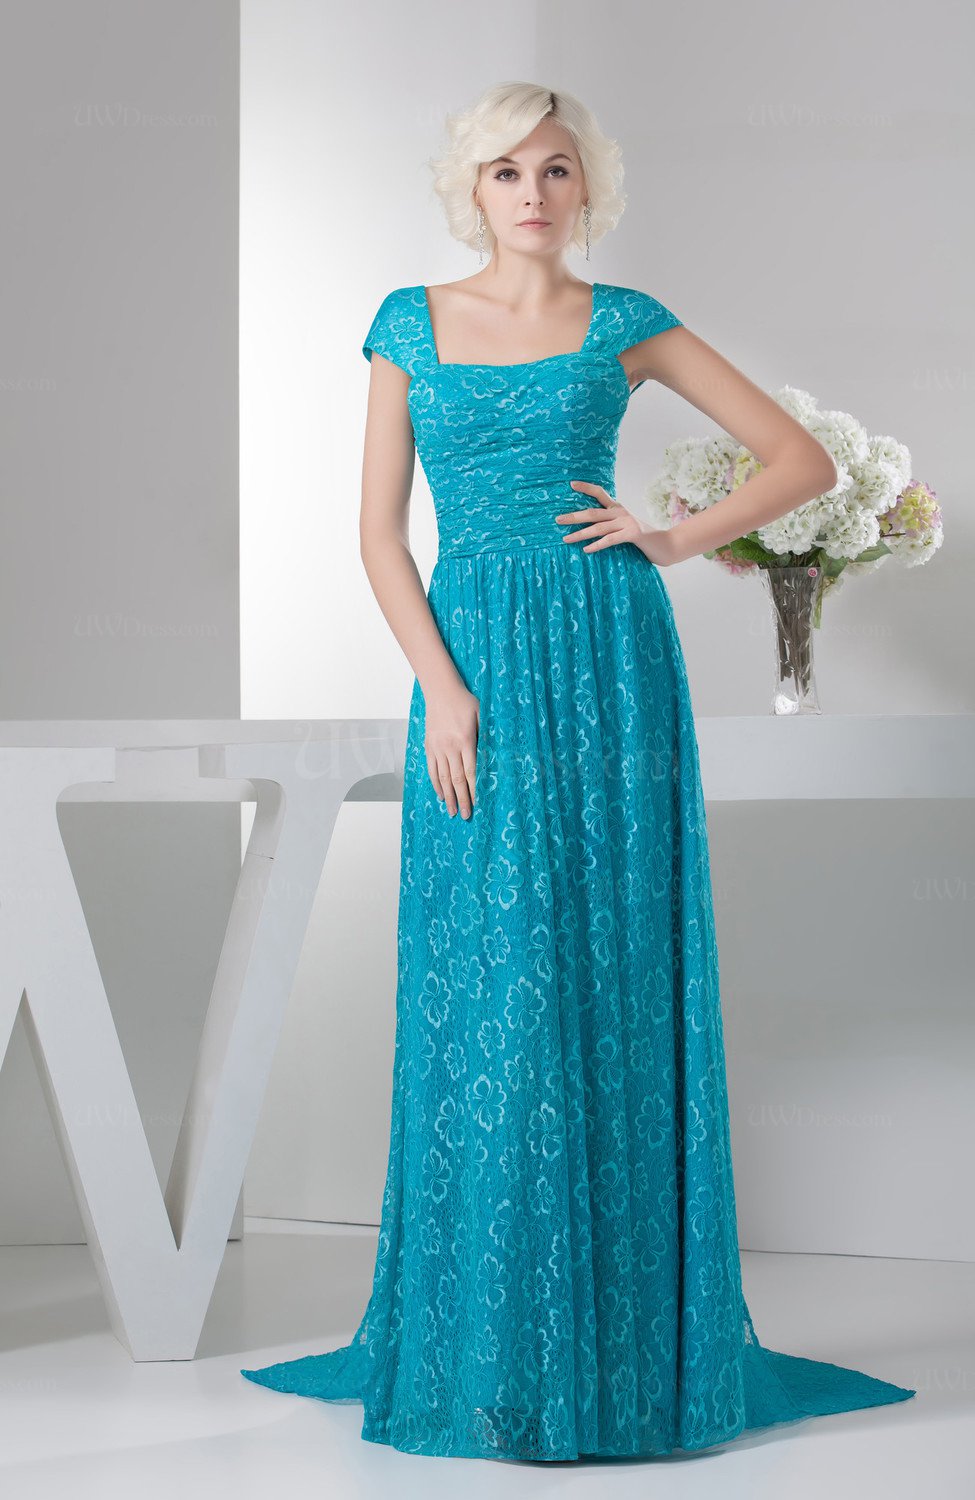 Long Evening Dresses Petite Uk : Petite Formal Gowns And Dresses ...